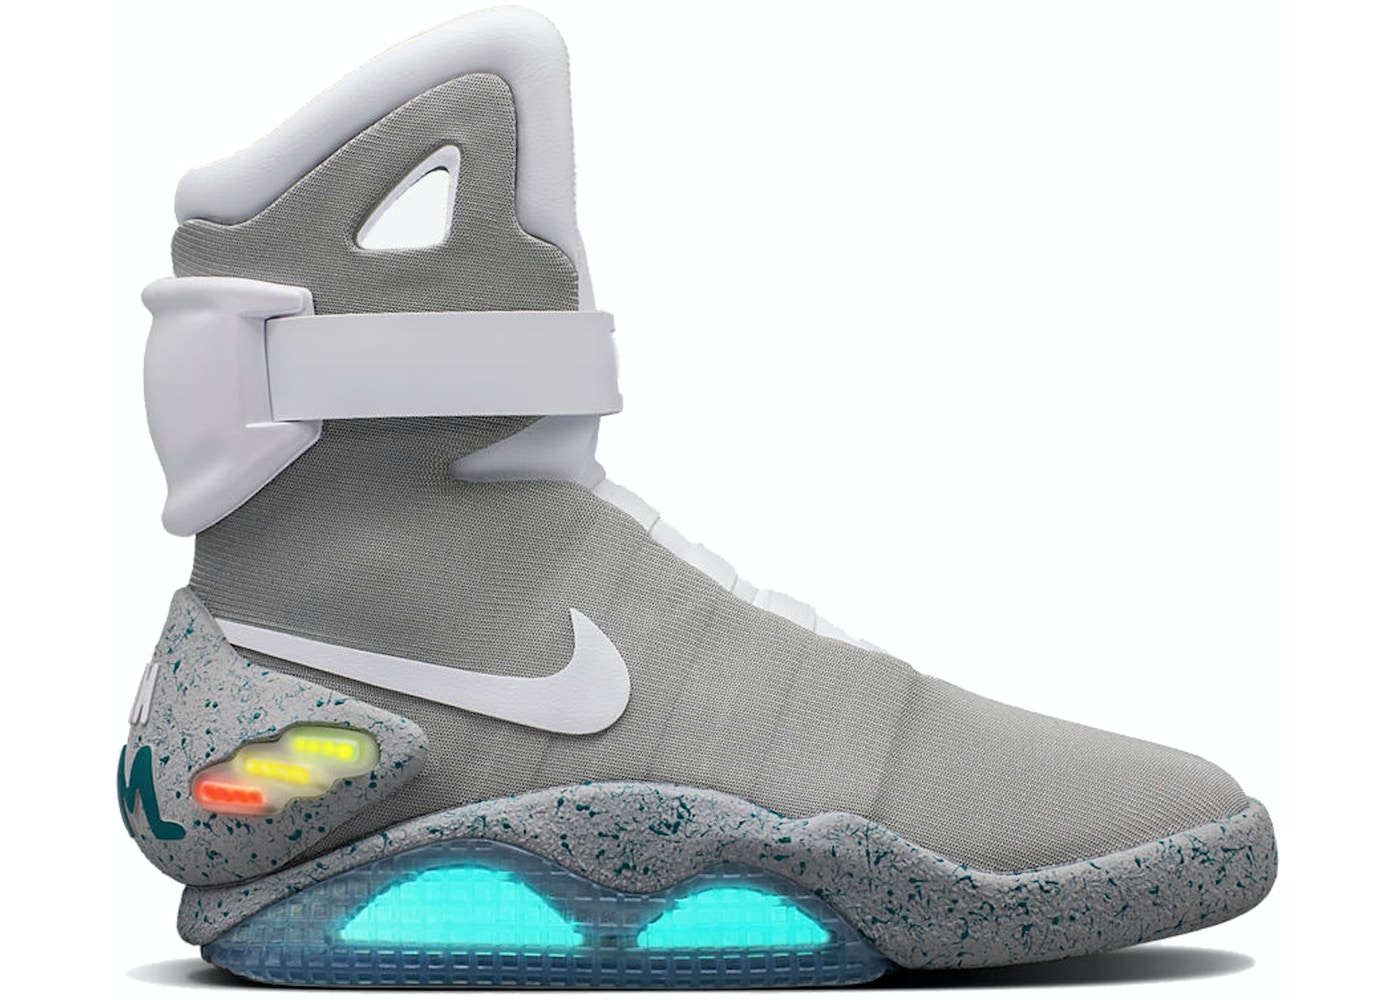 yeezy air mags